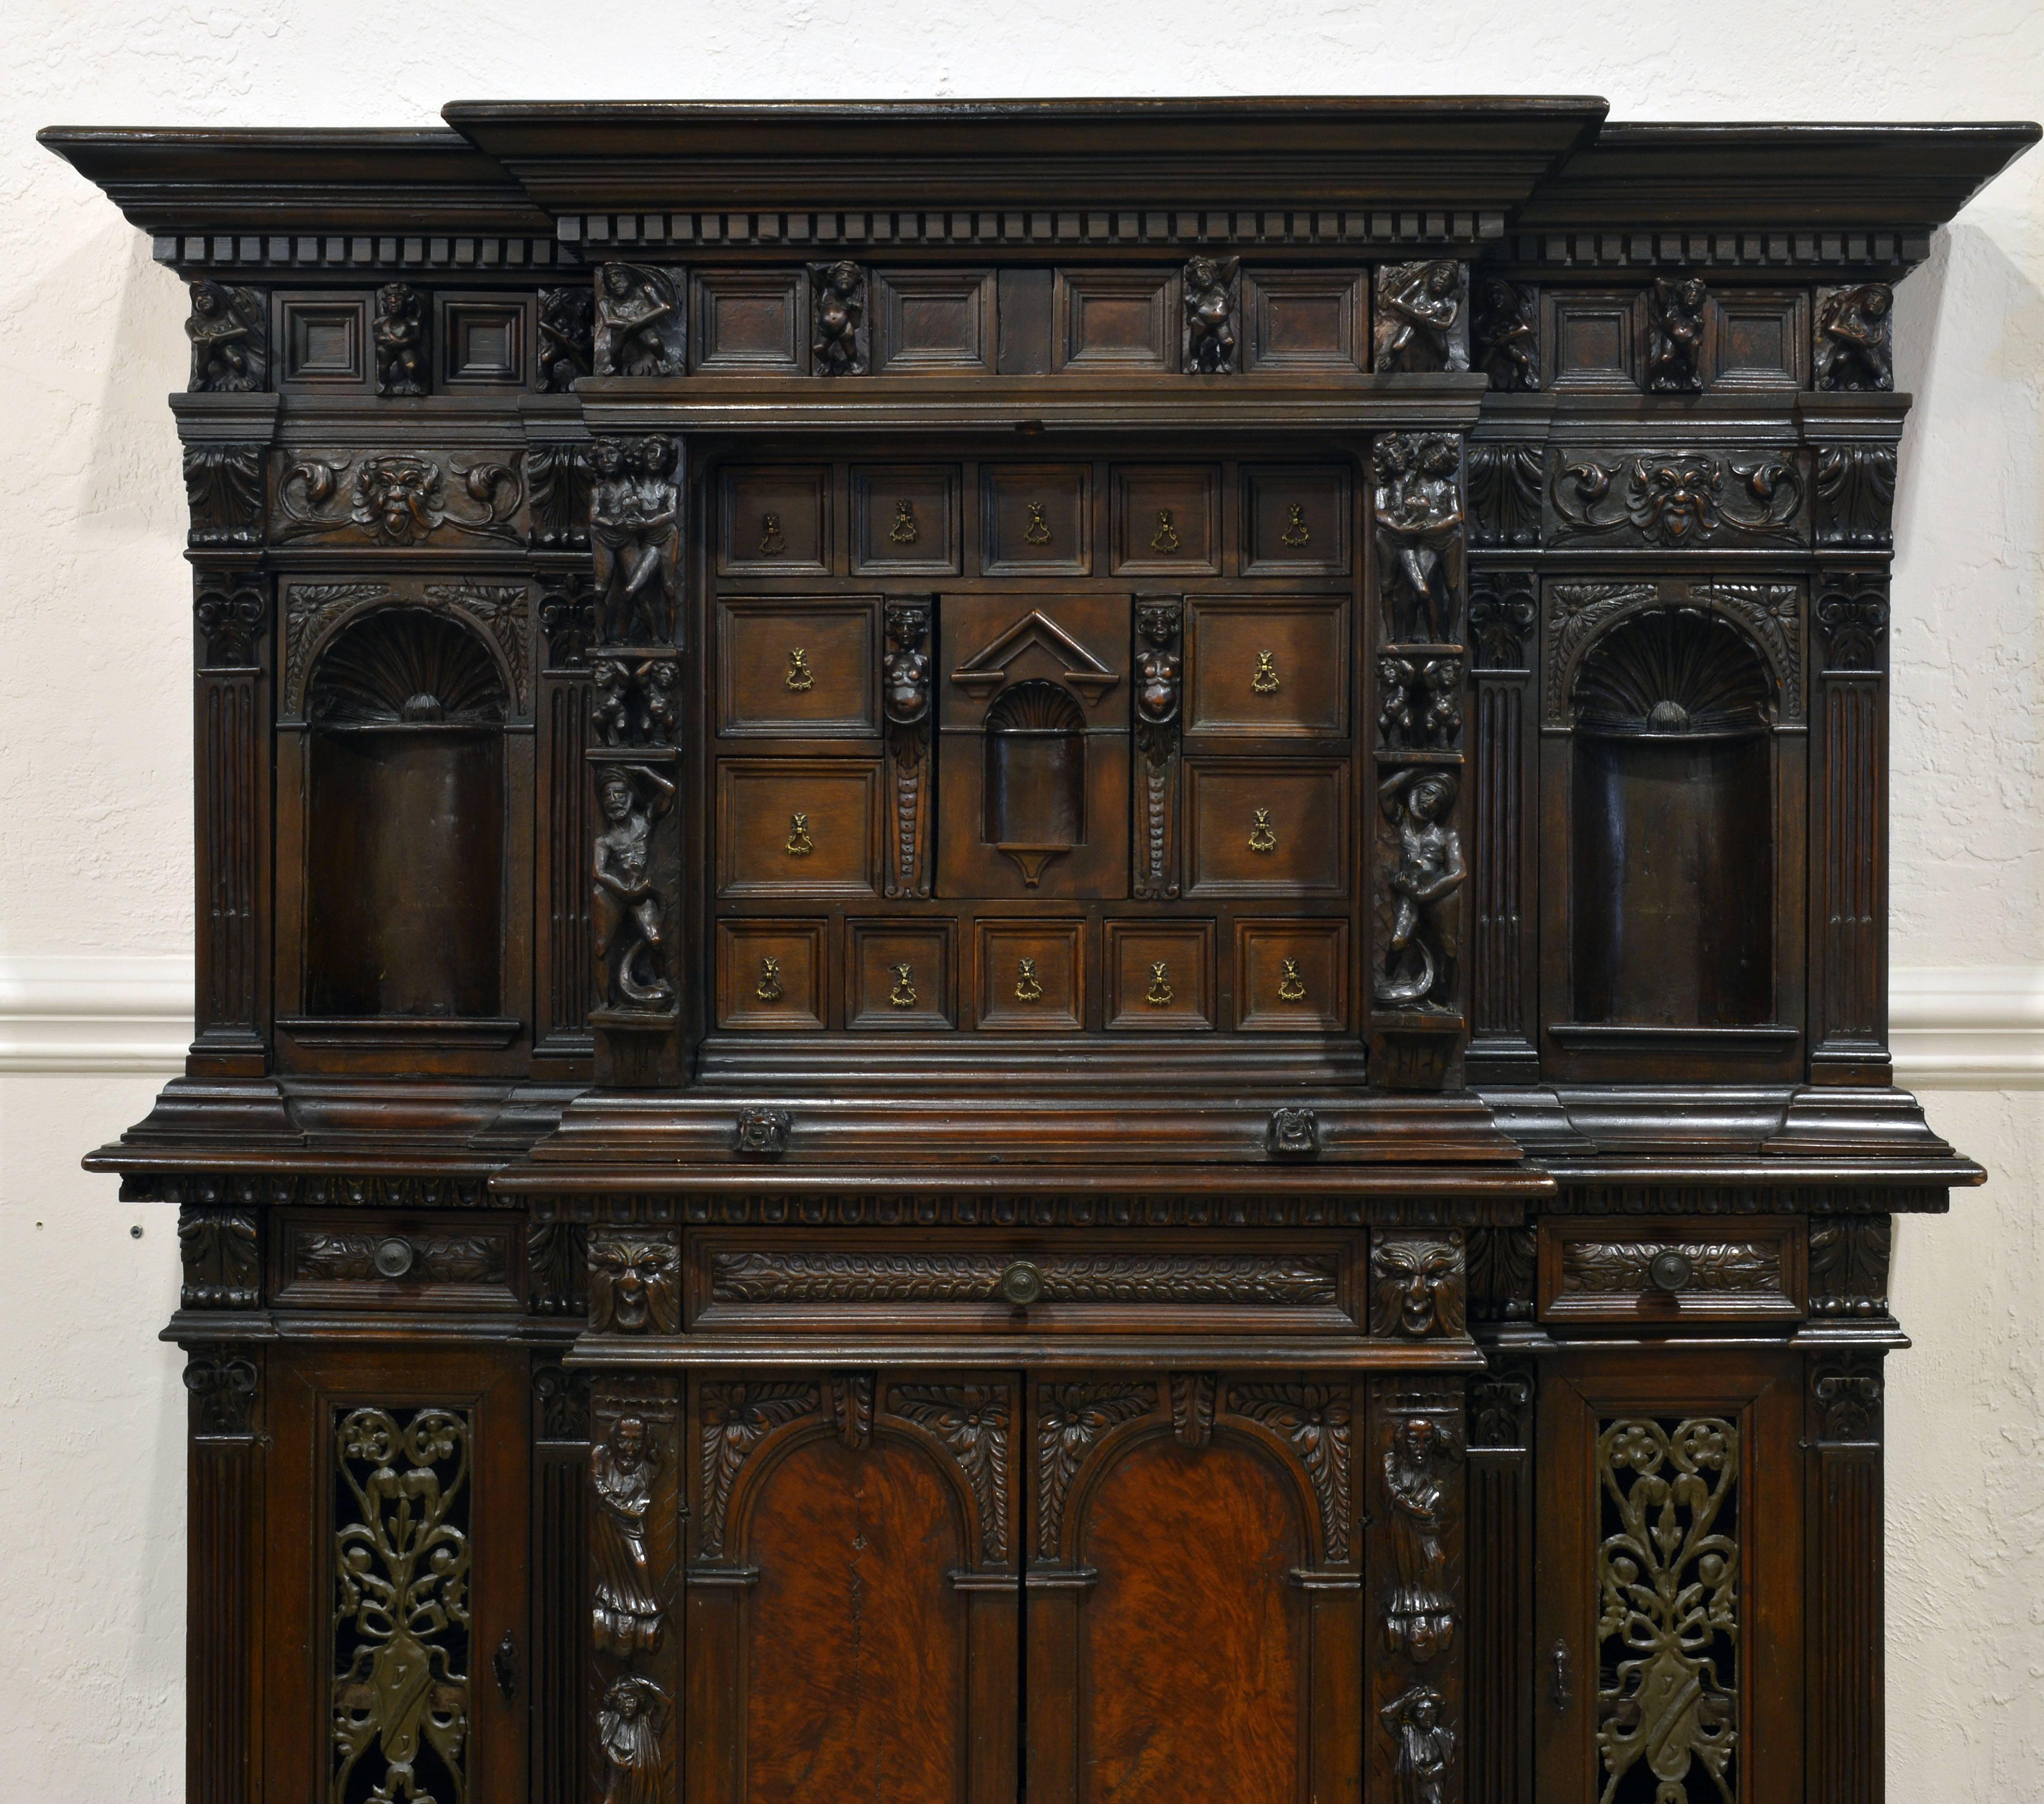 This palatial type of furniture originates in Genoa during the Renaissance in the 16th century. Originally a figurally carved fall front writing cabinet called a Stipo a bambocci, the bambocci being the high relief carved religious and secular